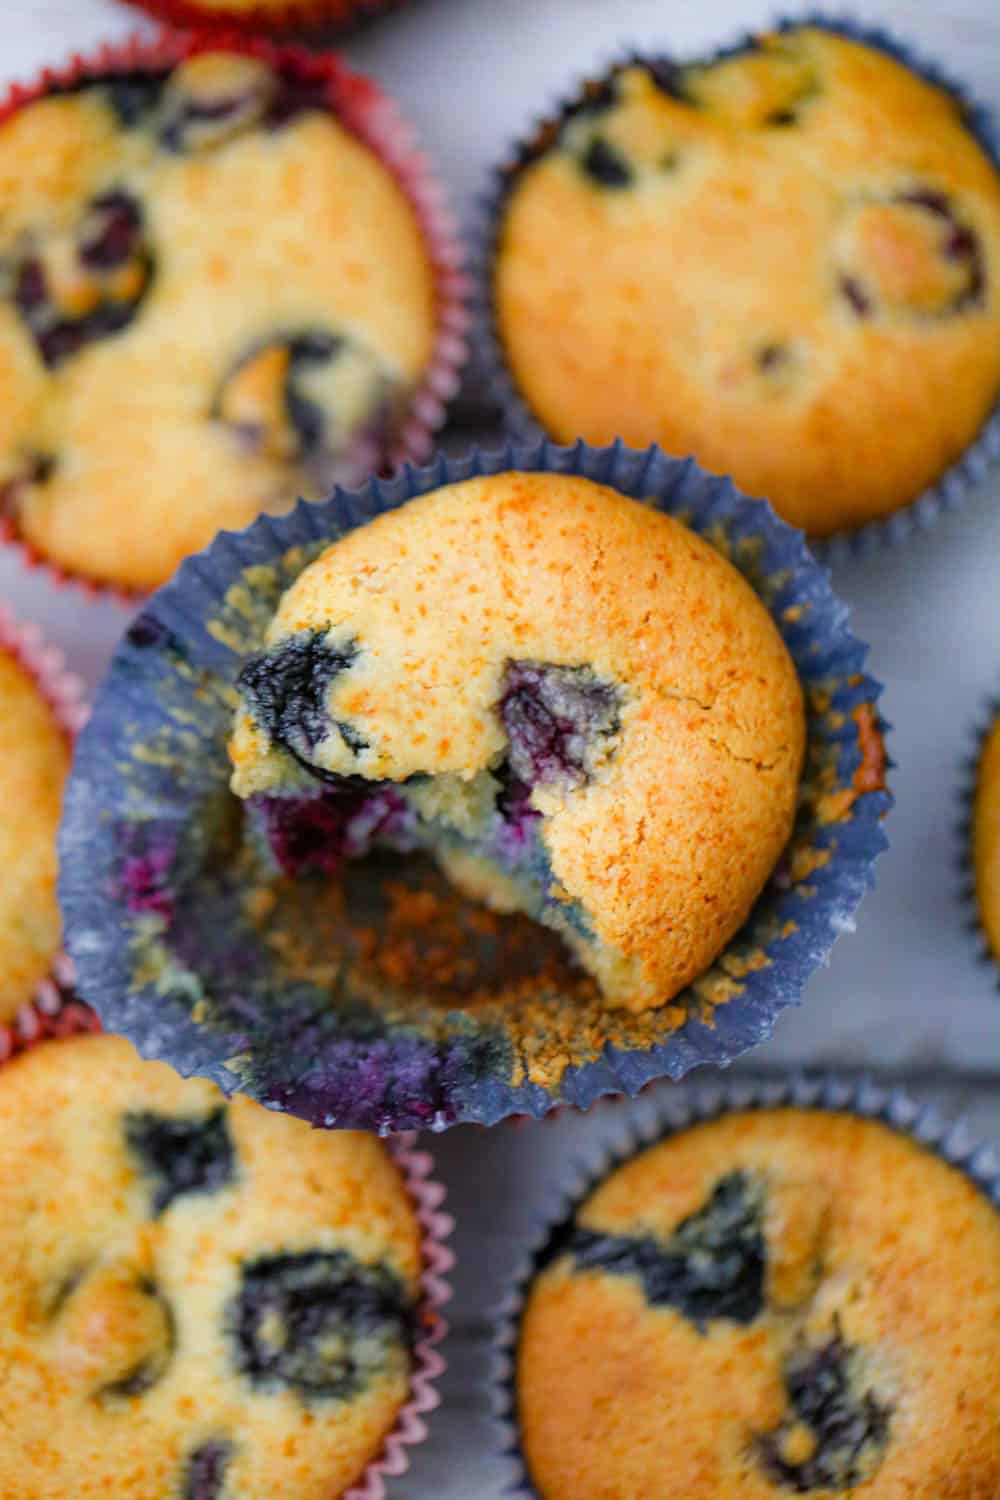 Healthy Whole Wheat Blueberry Muffins - Sugar Free & Vegan Options